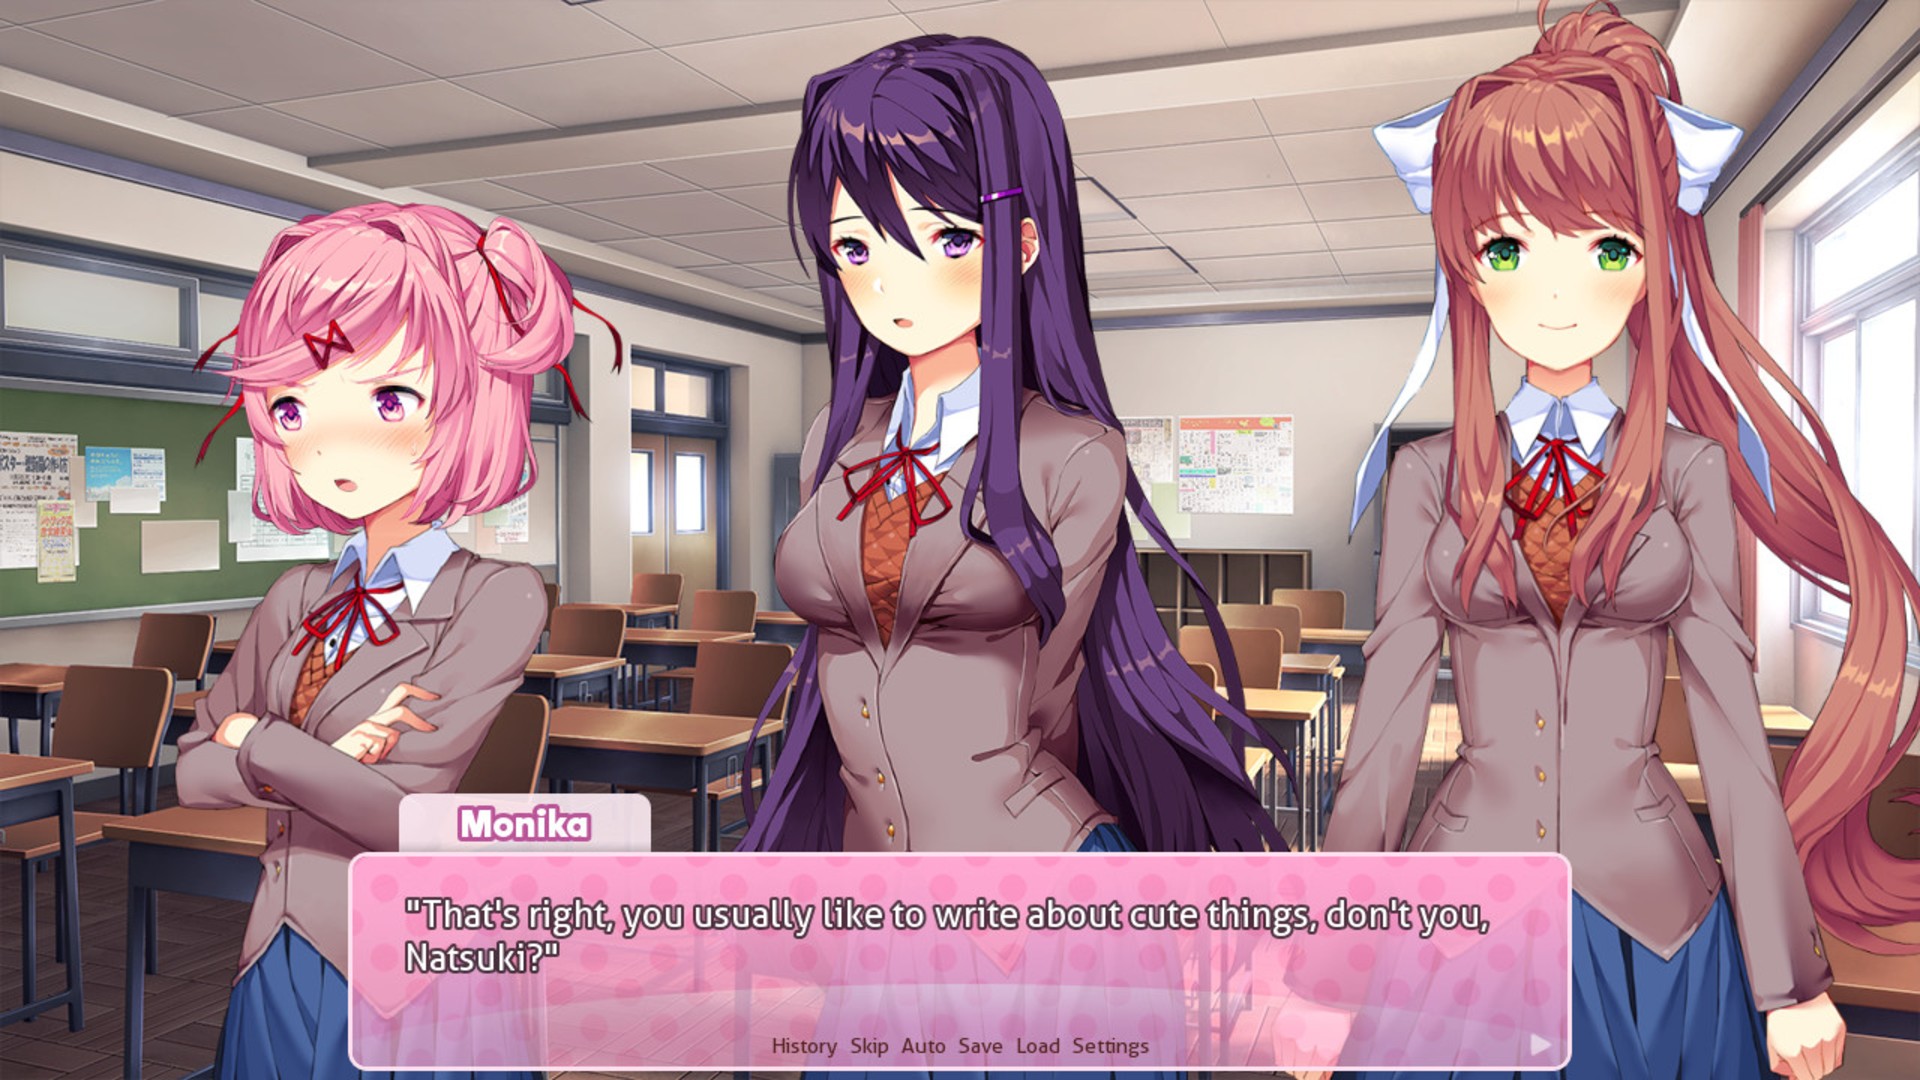 Best anime games: Doki Doki Literature Club. Image shows three anime school girls. One named Monika is saying "That's right, you usually like to write about cute things, don't you, Natsuki?" as seen in a text box.